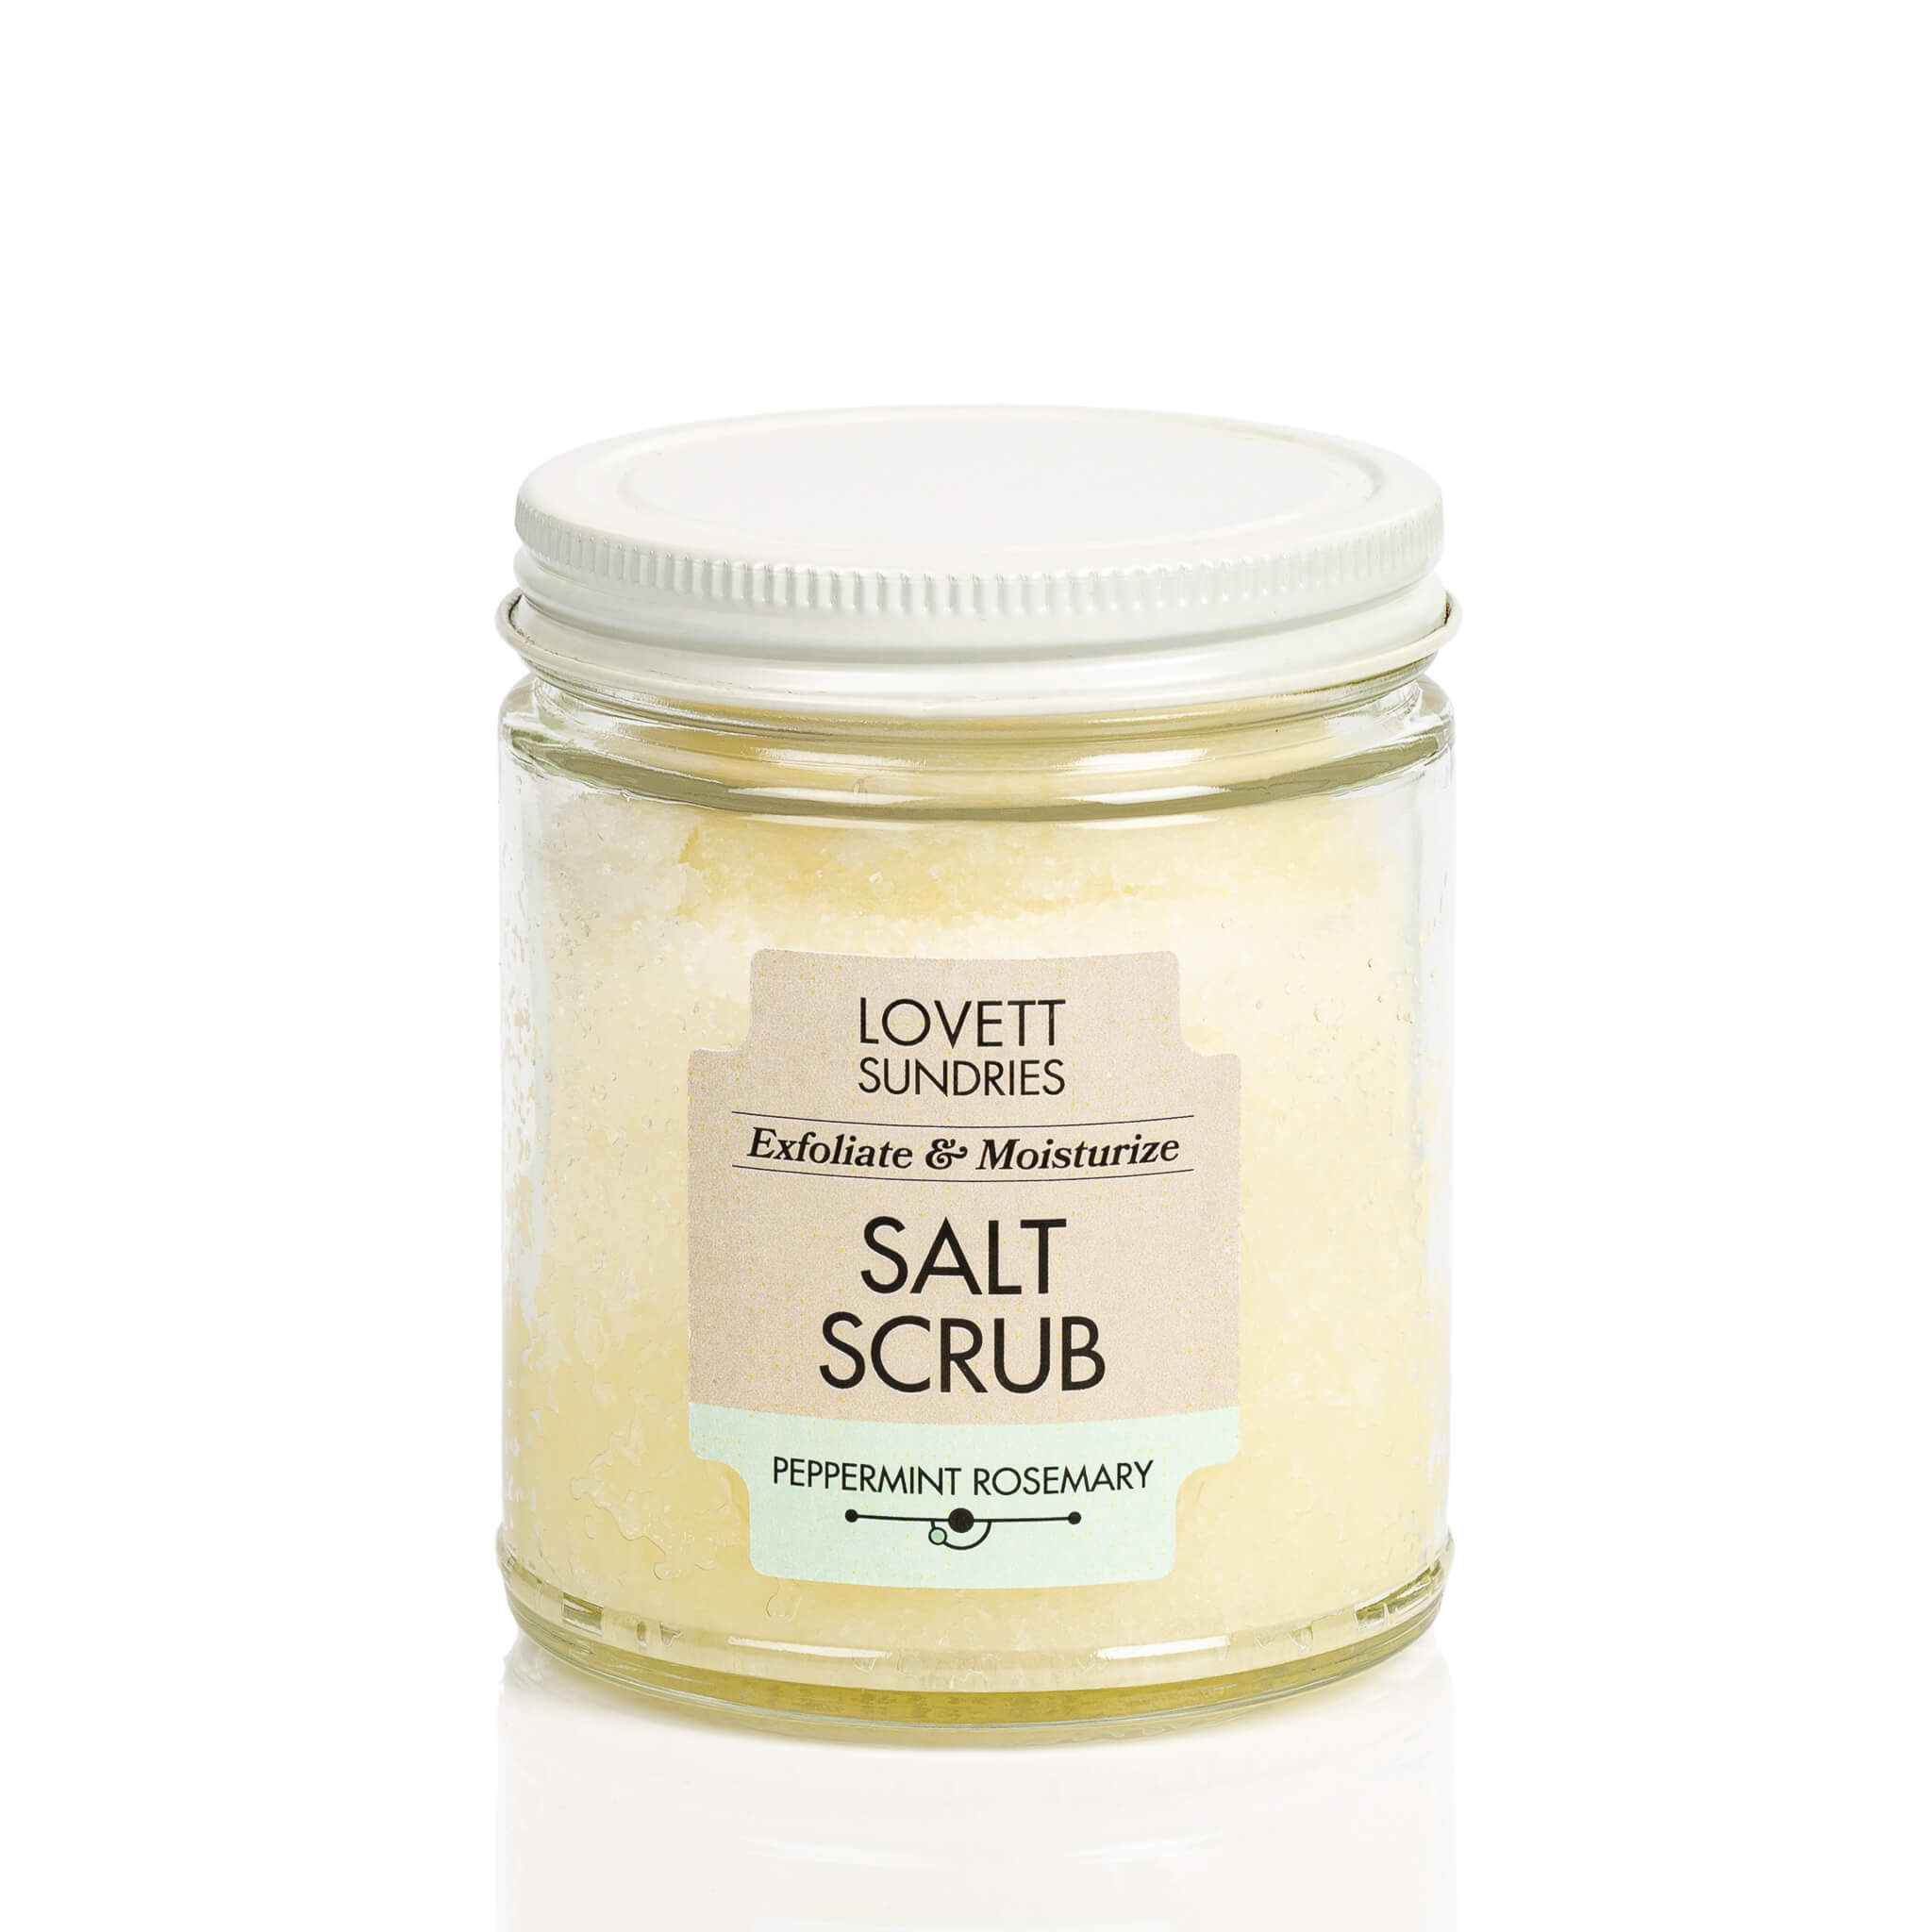 Exfoliating and moisturizing peppermint rosemary scented all natural salt scrub. 